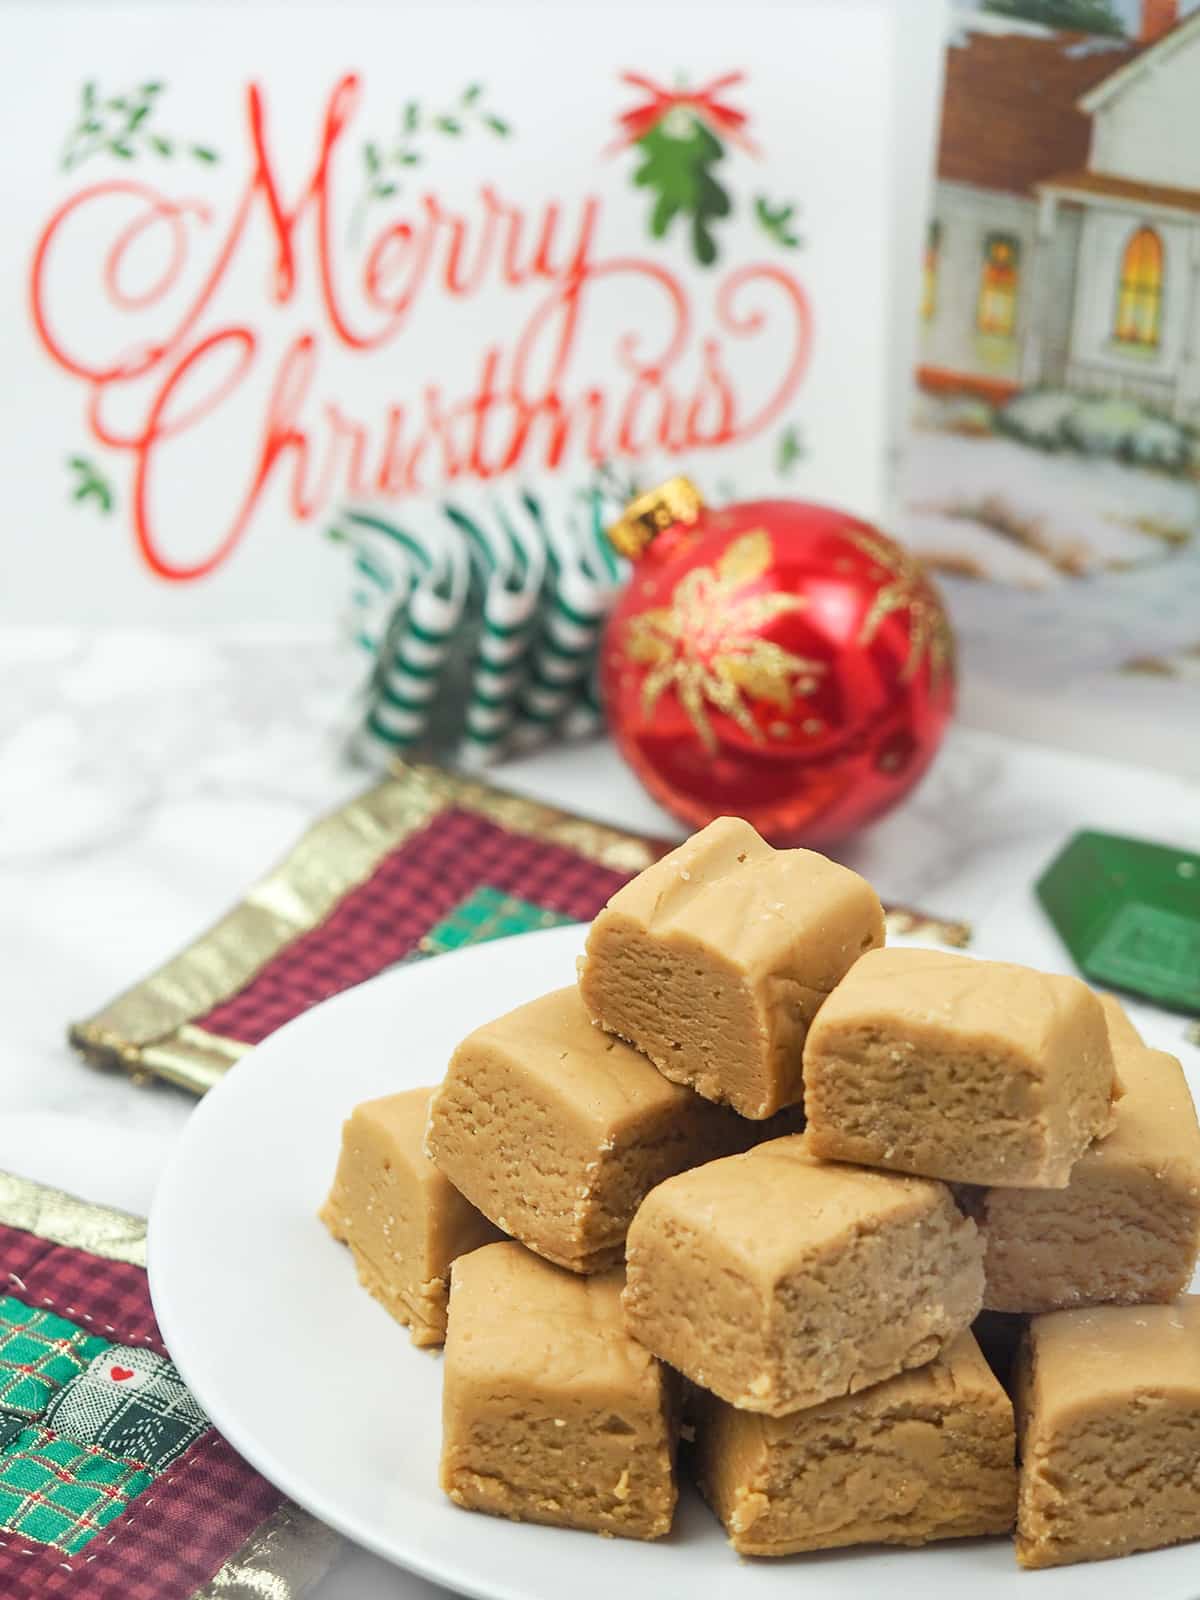 fudge on a plate with ornaments